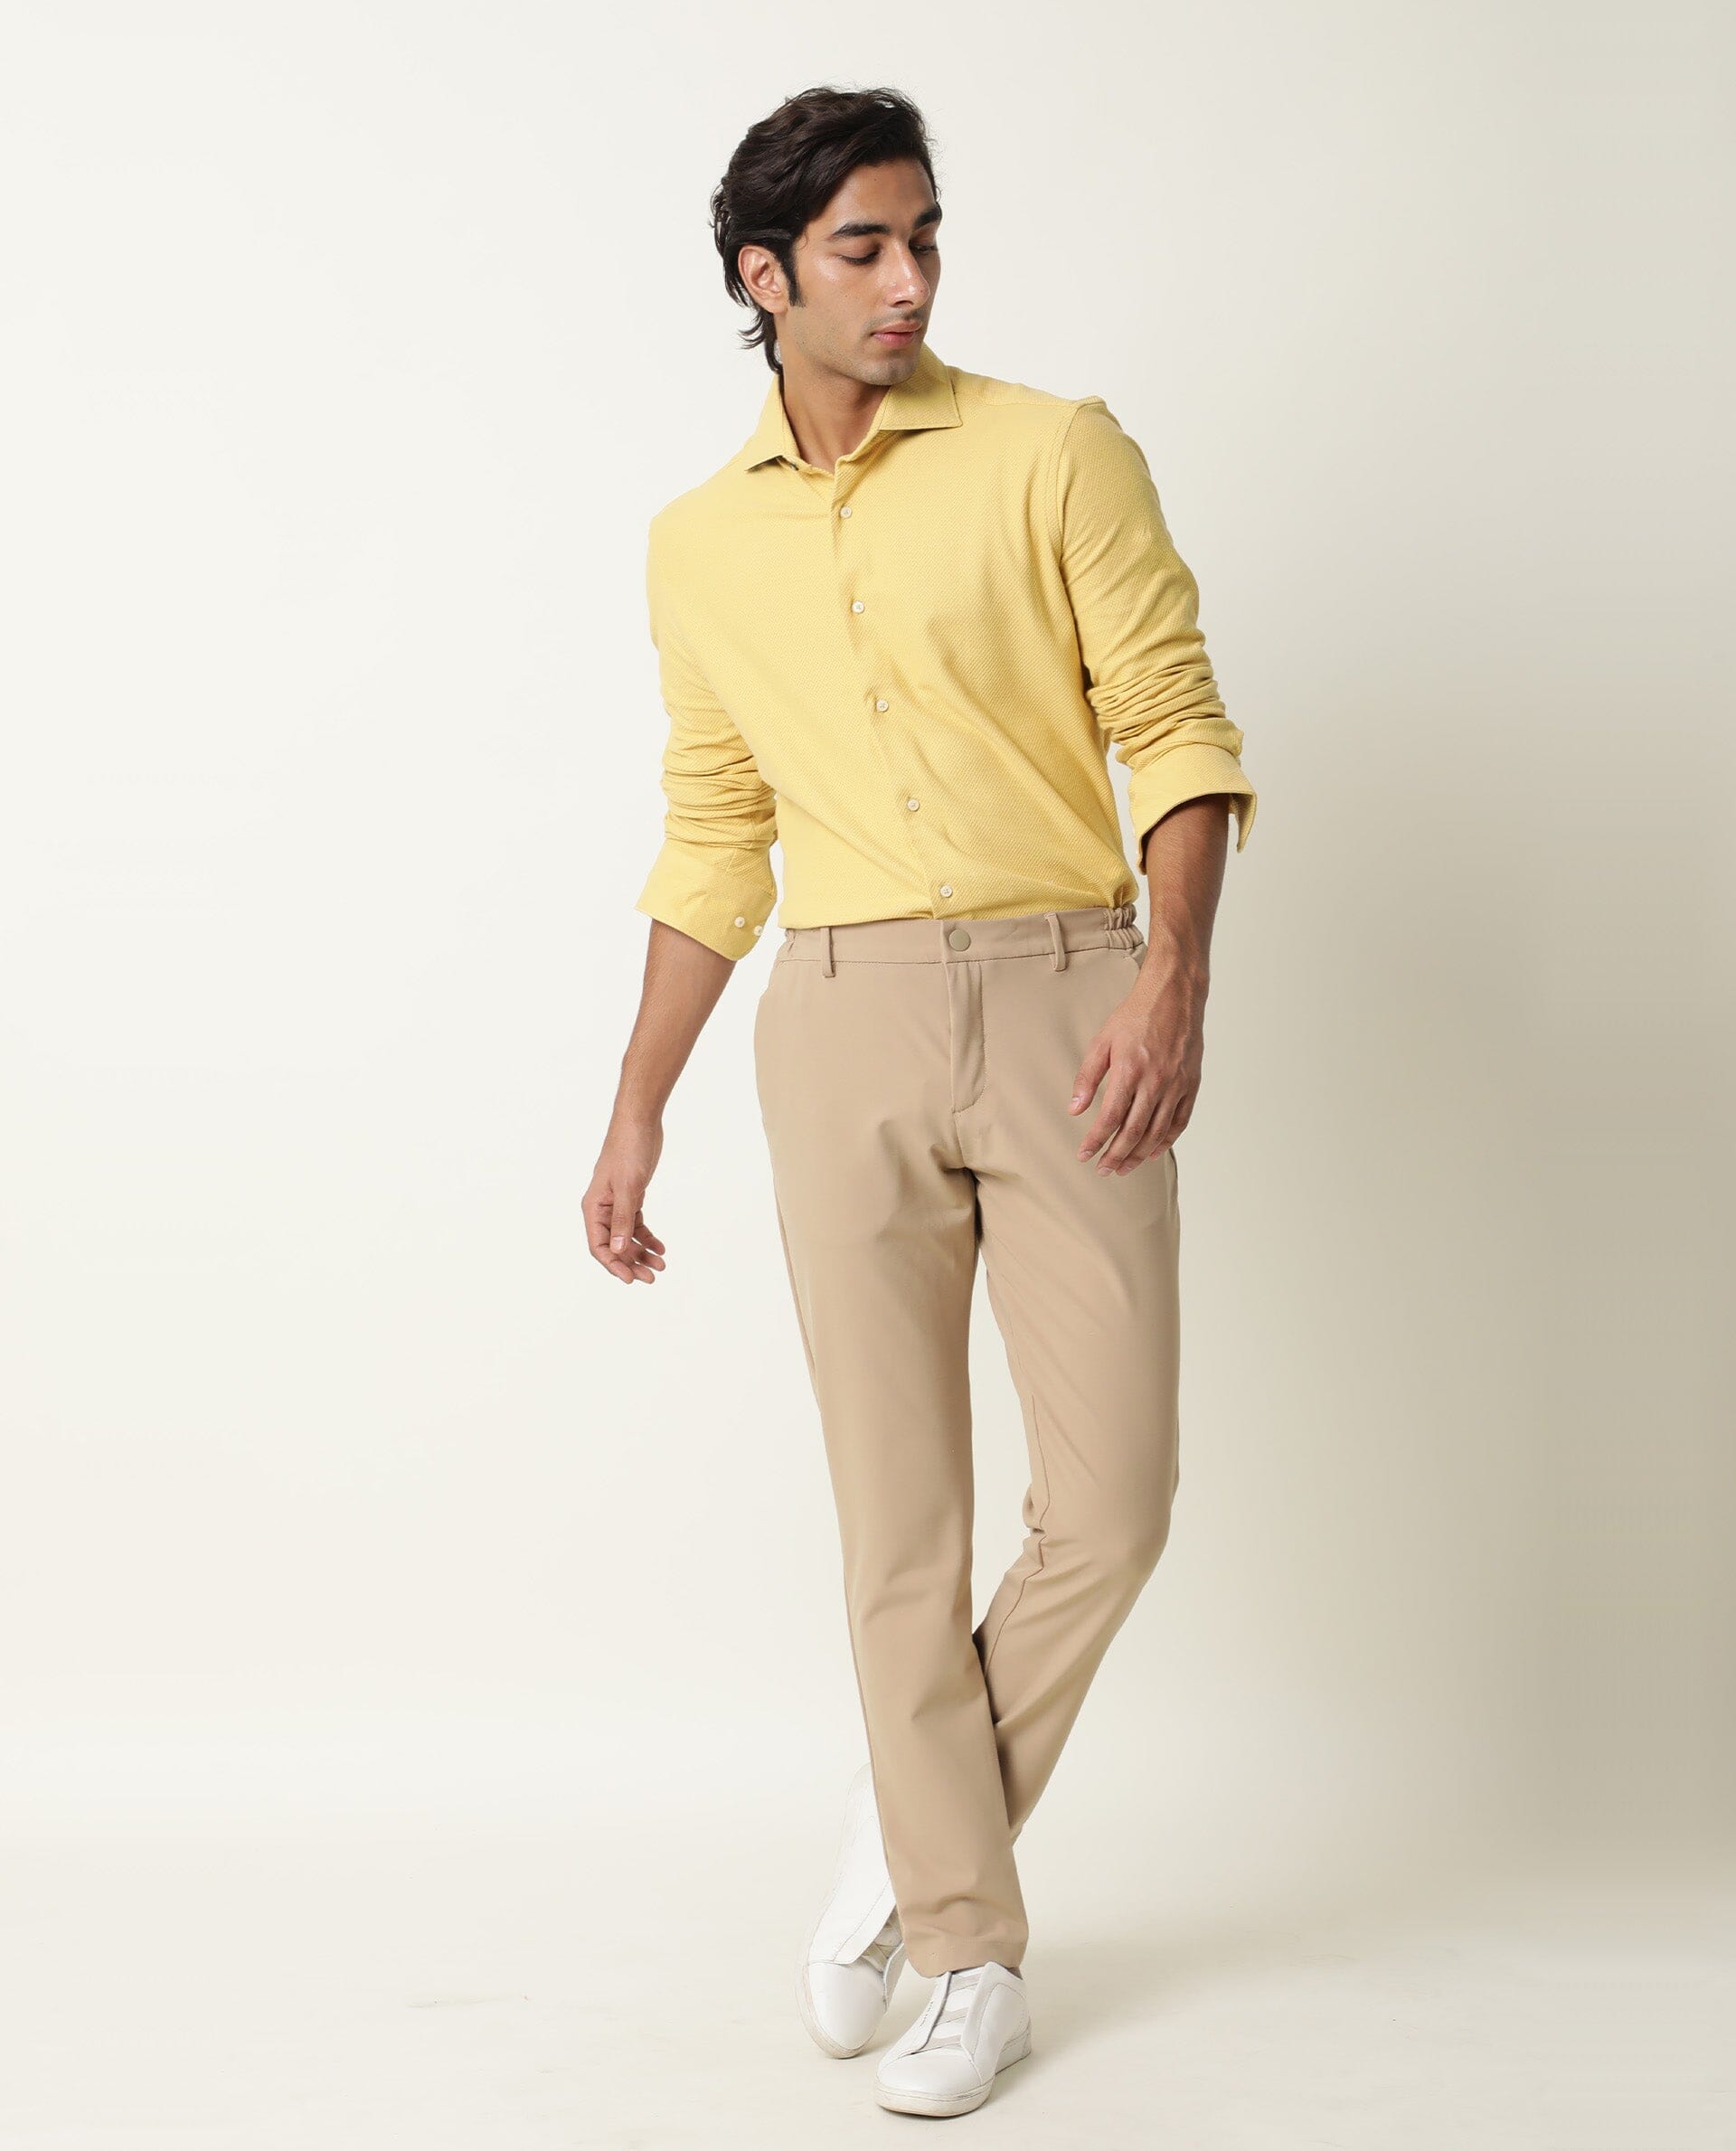 12 Yellow Tshirt Combination For Men  What To Wear With A Yellow Tshirt   Hiscraves